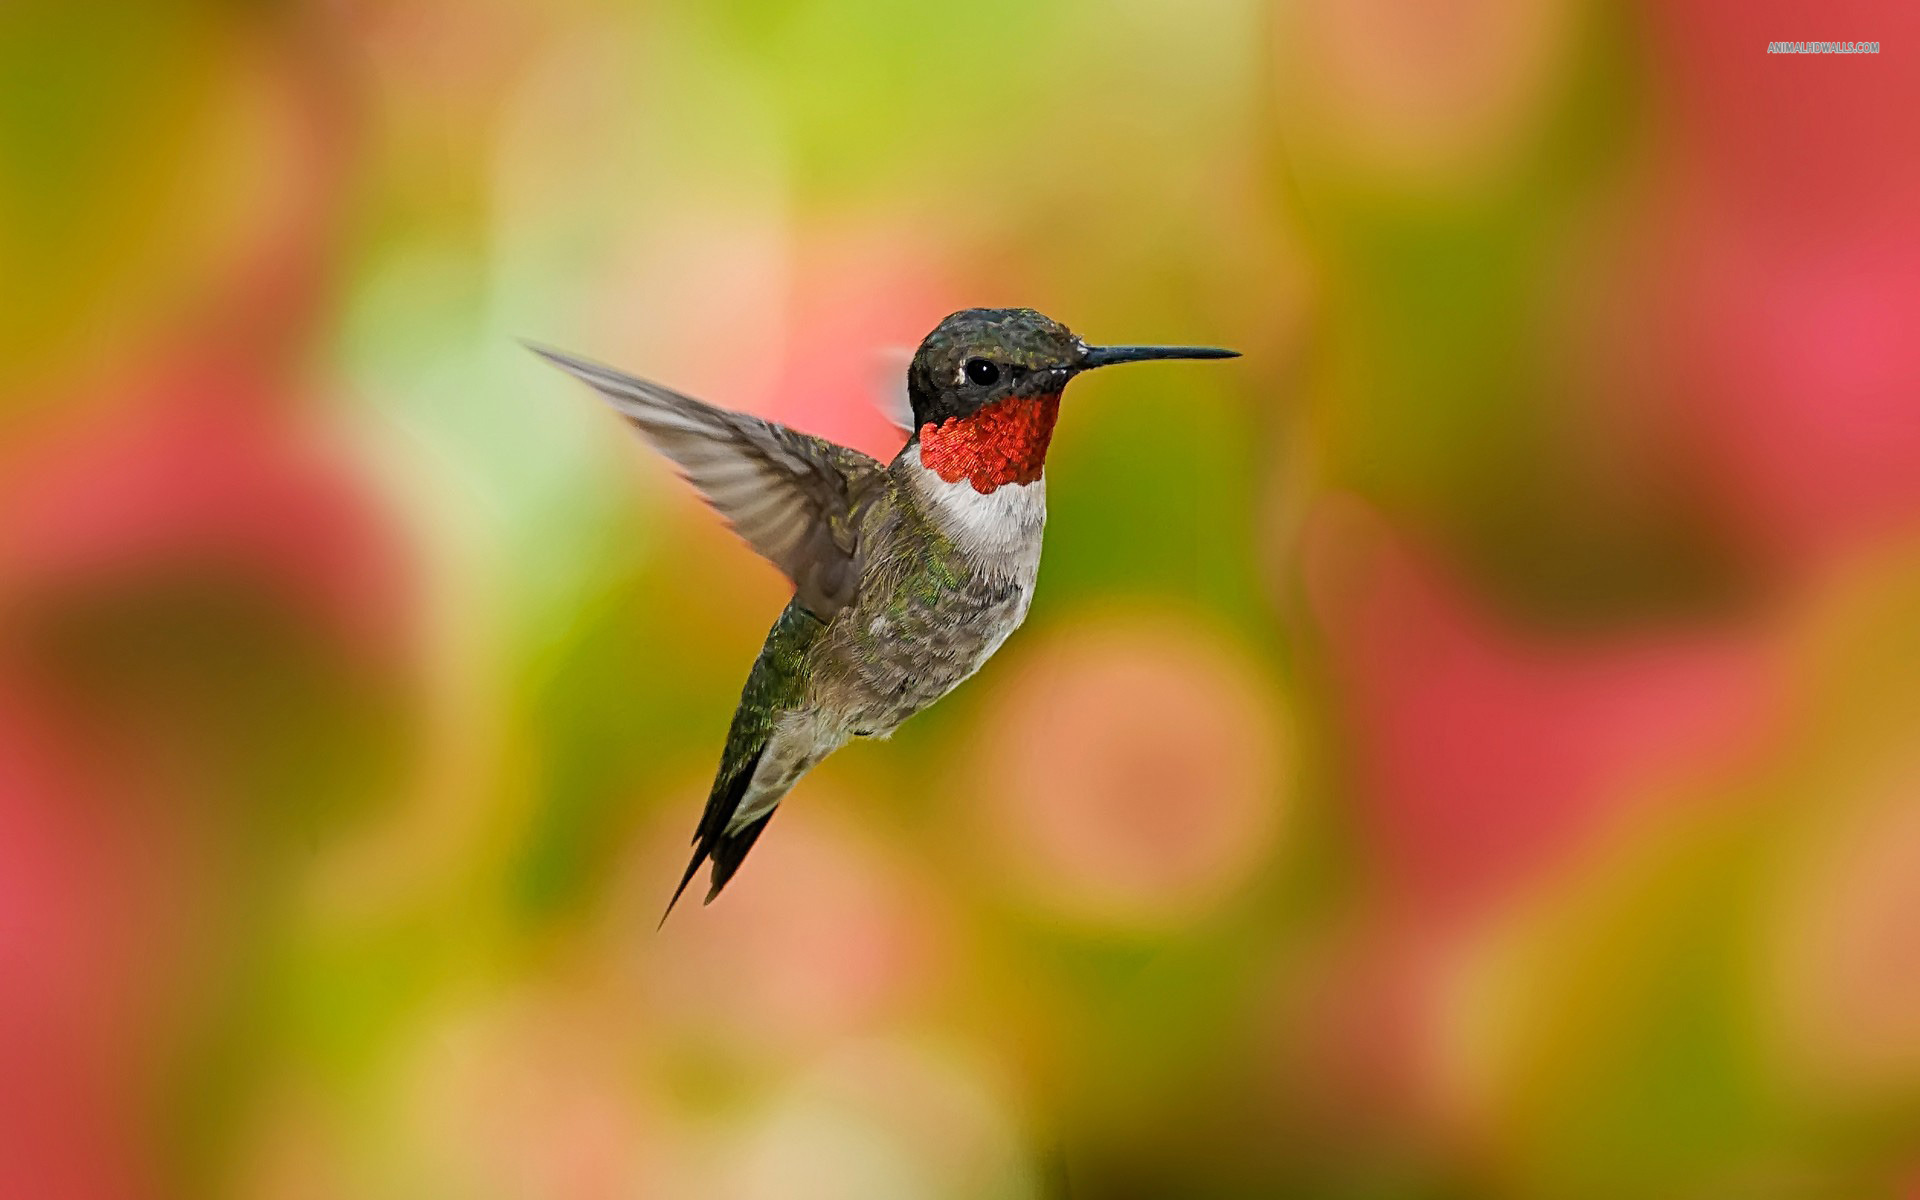 Following the click of the download button, right click on the image and select SAVE AS to complete your download. Filename : Hummingbird Wallpaper